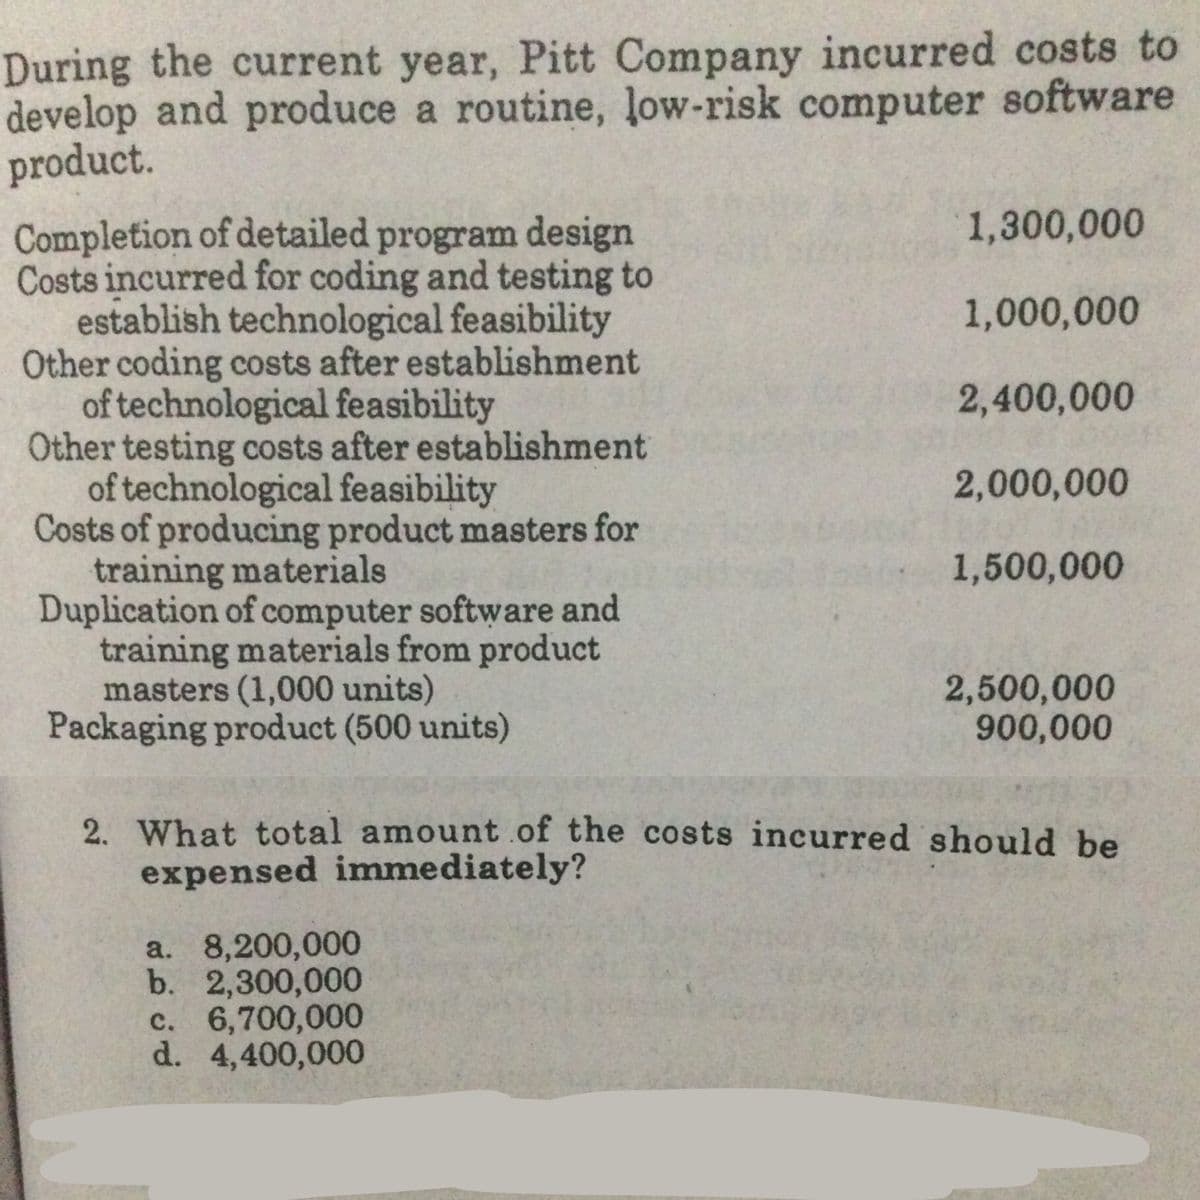 During the current year, Pitt Company incurred costs to
develop and produce a routine, low-risk computer software
product.
1,300,000
Completion of detailed program design
Costs incurred for coding and testing to
establish technological feasibility
Other coding costs after establishment
of technological feasibility
Other testing costs after establishment
of technological feasibility
Costs of producing product masters for
training materials
Duplication of computer software and
training materials from product
masters (1,000 units)
Packaging product (500 units)
1,000,000
2,400,000
2,000,000
1,500,000
2,500,000
900,000
2. What total amount .of the costs incurred should be
expensed immediately?
a. 8,200,000
b. 2,300,000
c. 6,700,000
d. 4,400,000
